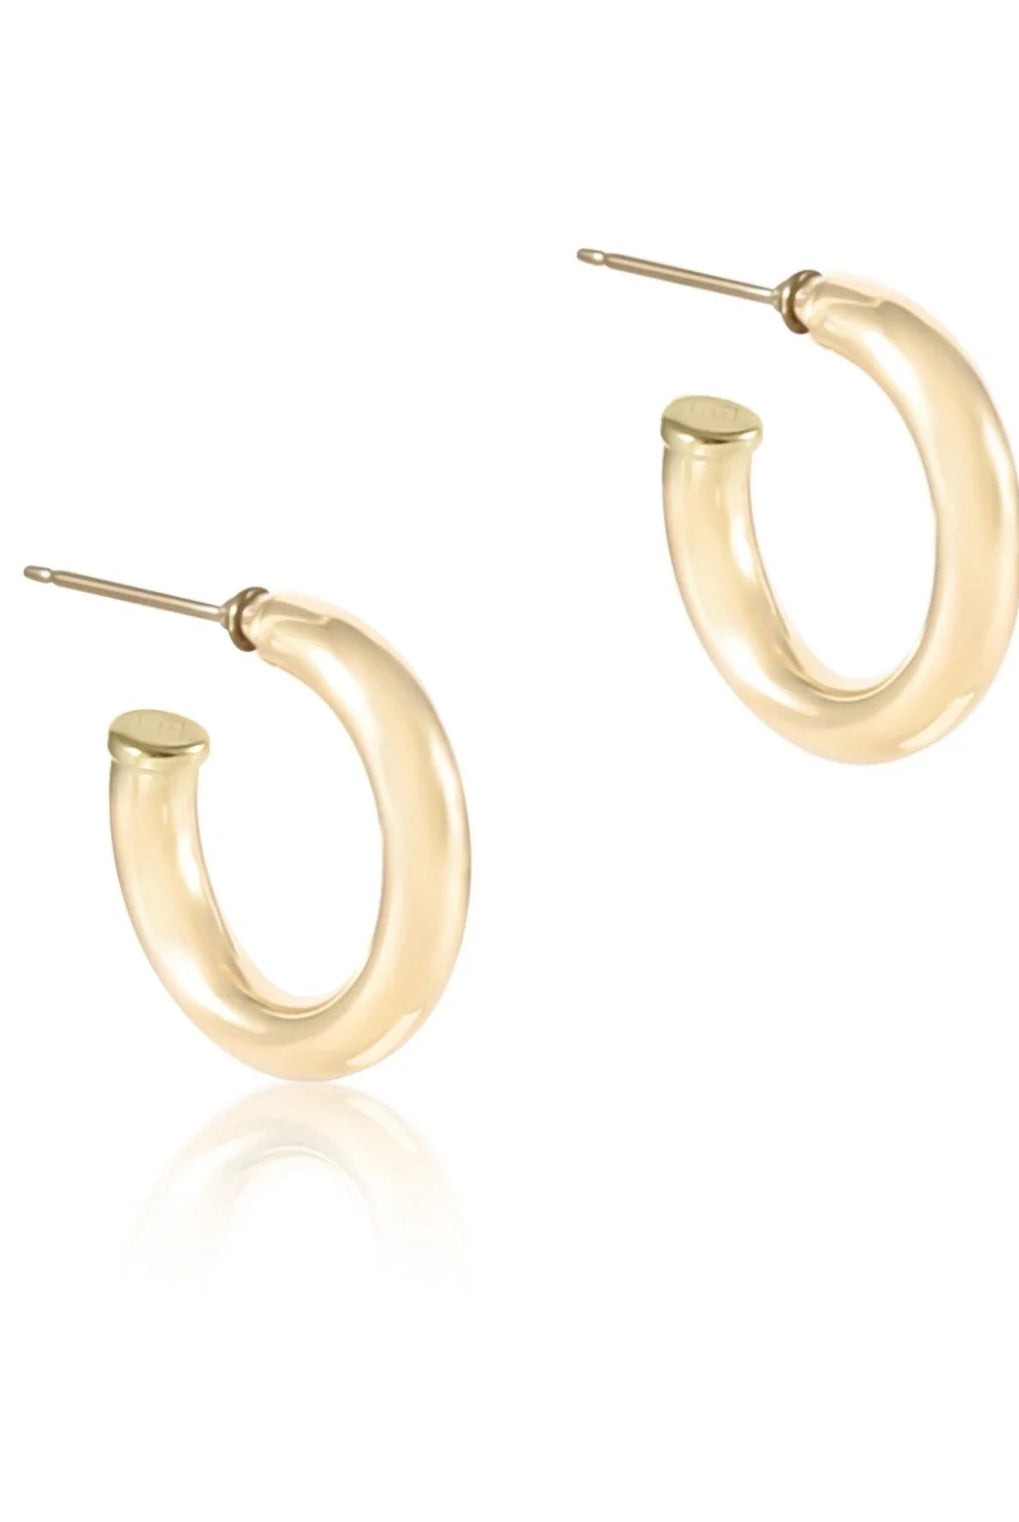 1” Round Gold Post Hoop-Earrings-eNewton-The Lovely Closet, Women's Fashion Boutique in Alexandria, KY